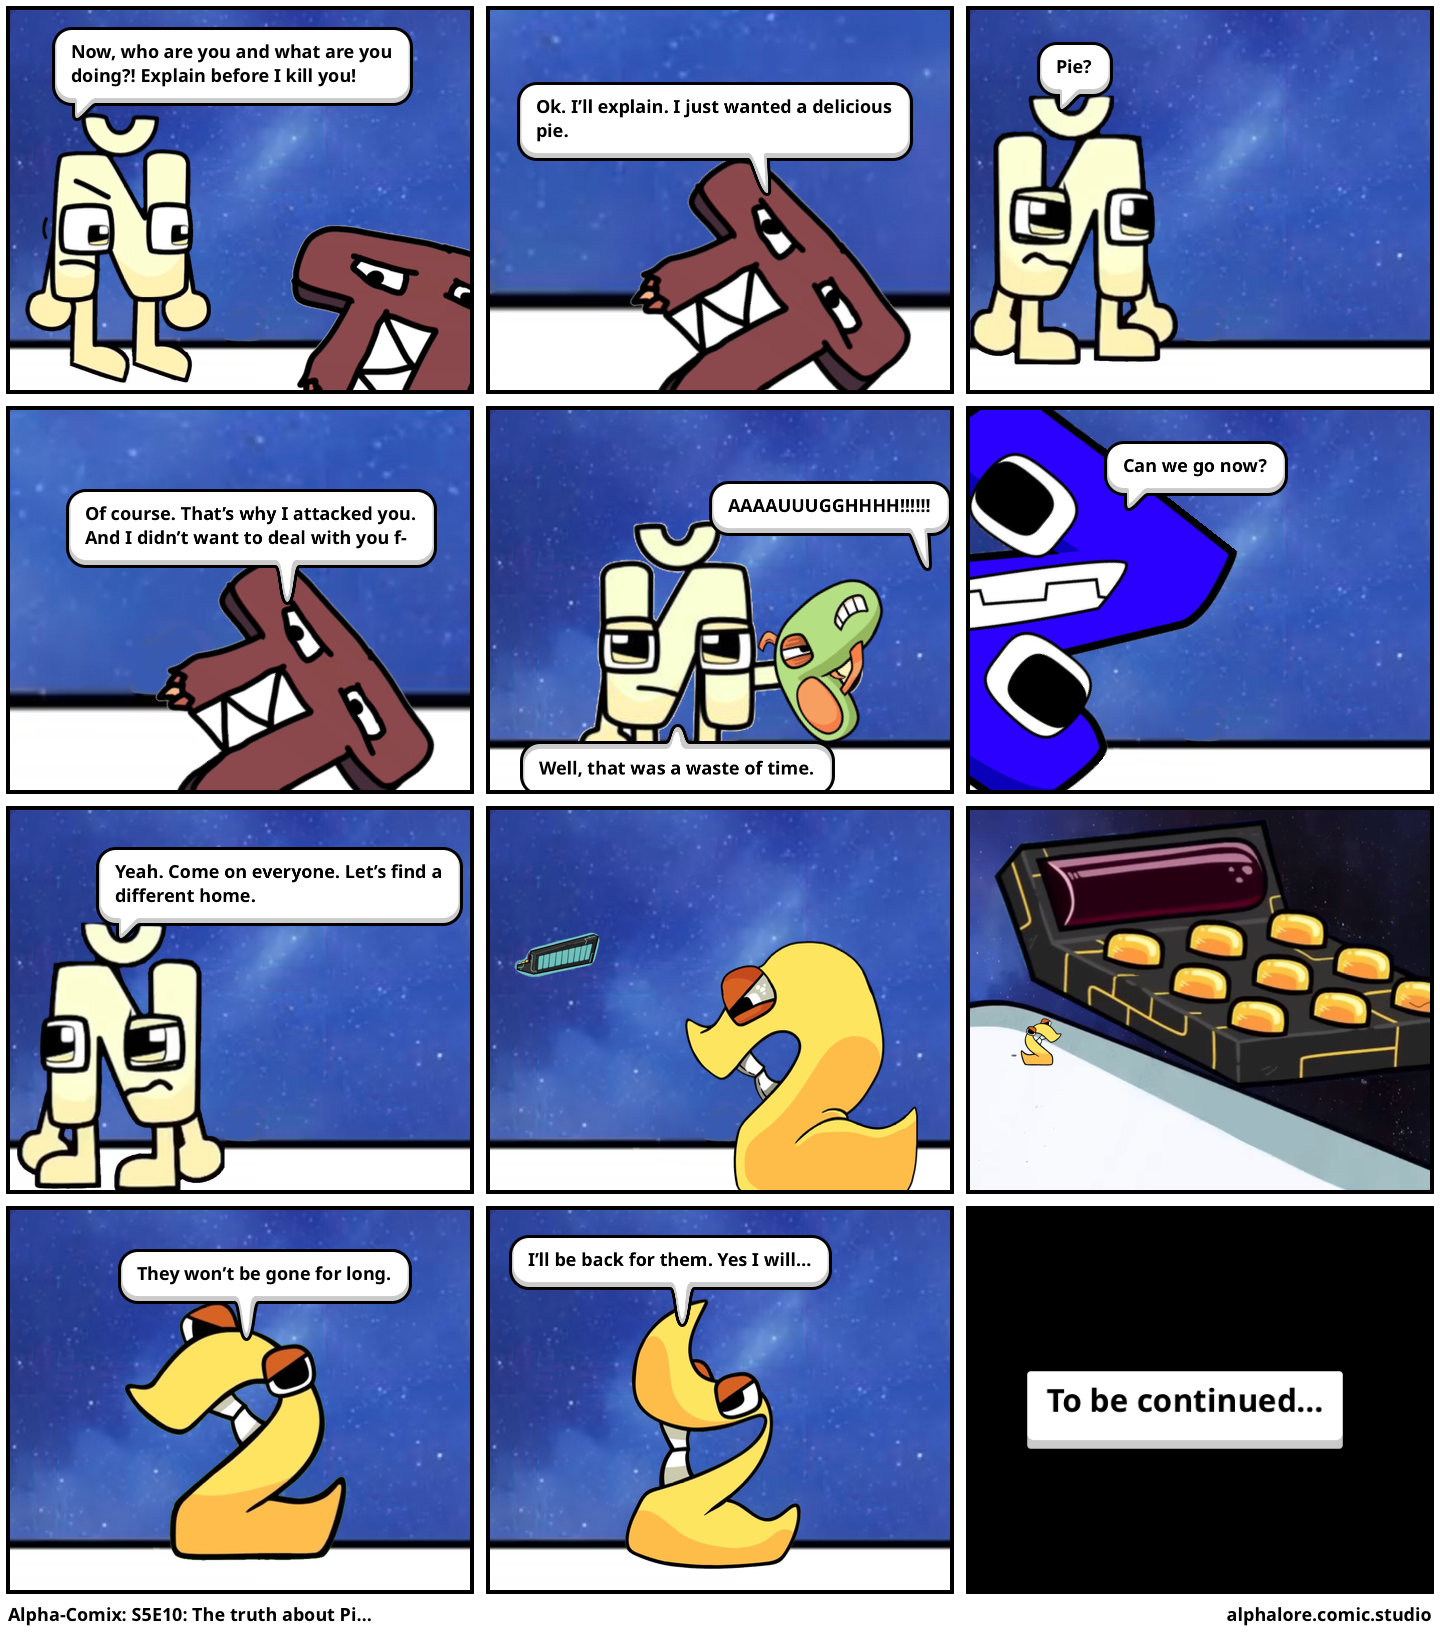 Alpha-Comix: S5E10: The truth about Pi…